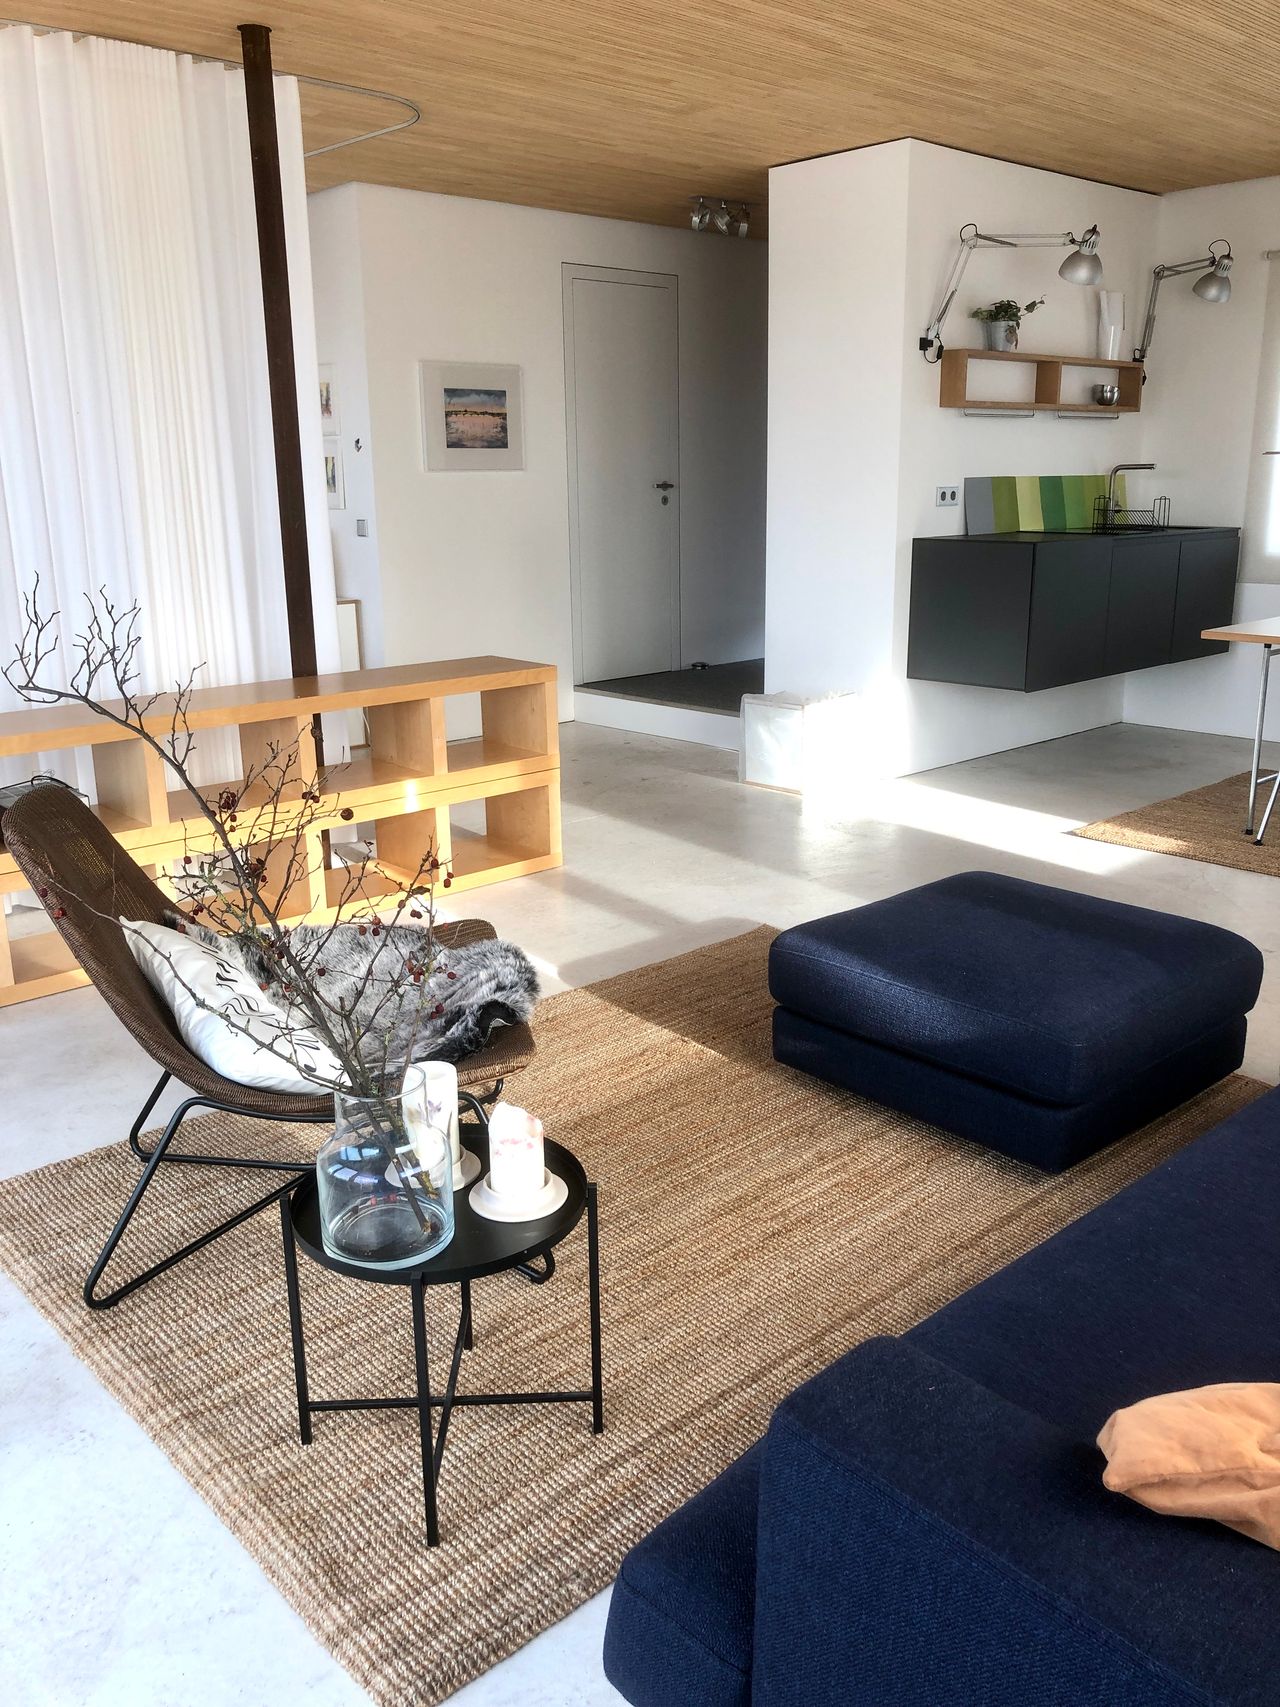 Furnished Penthouse-Loft with kitchen and Taunus view in central location - Bad Vilbel next to Frankfurt